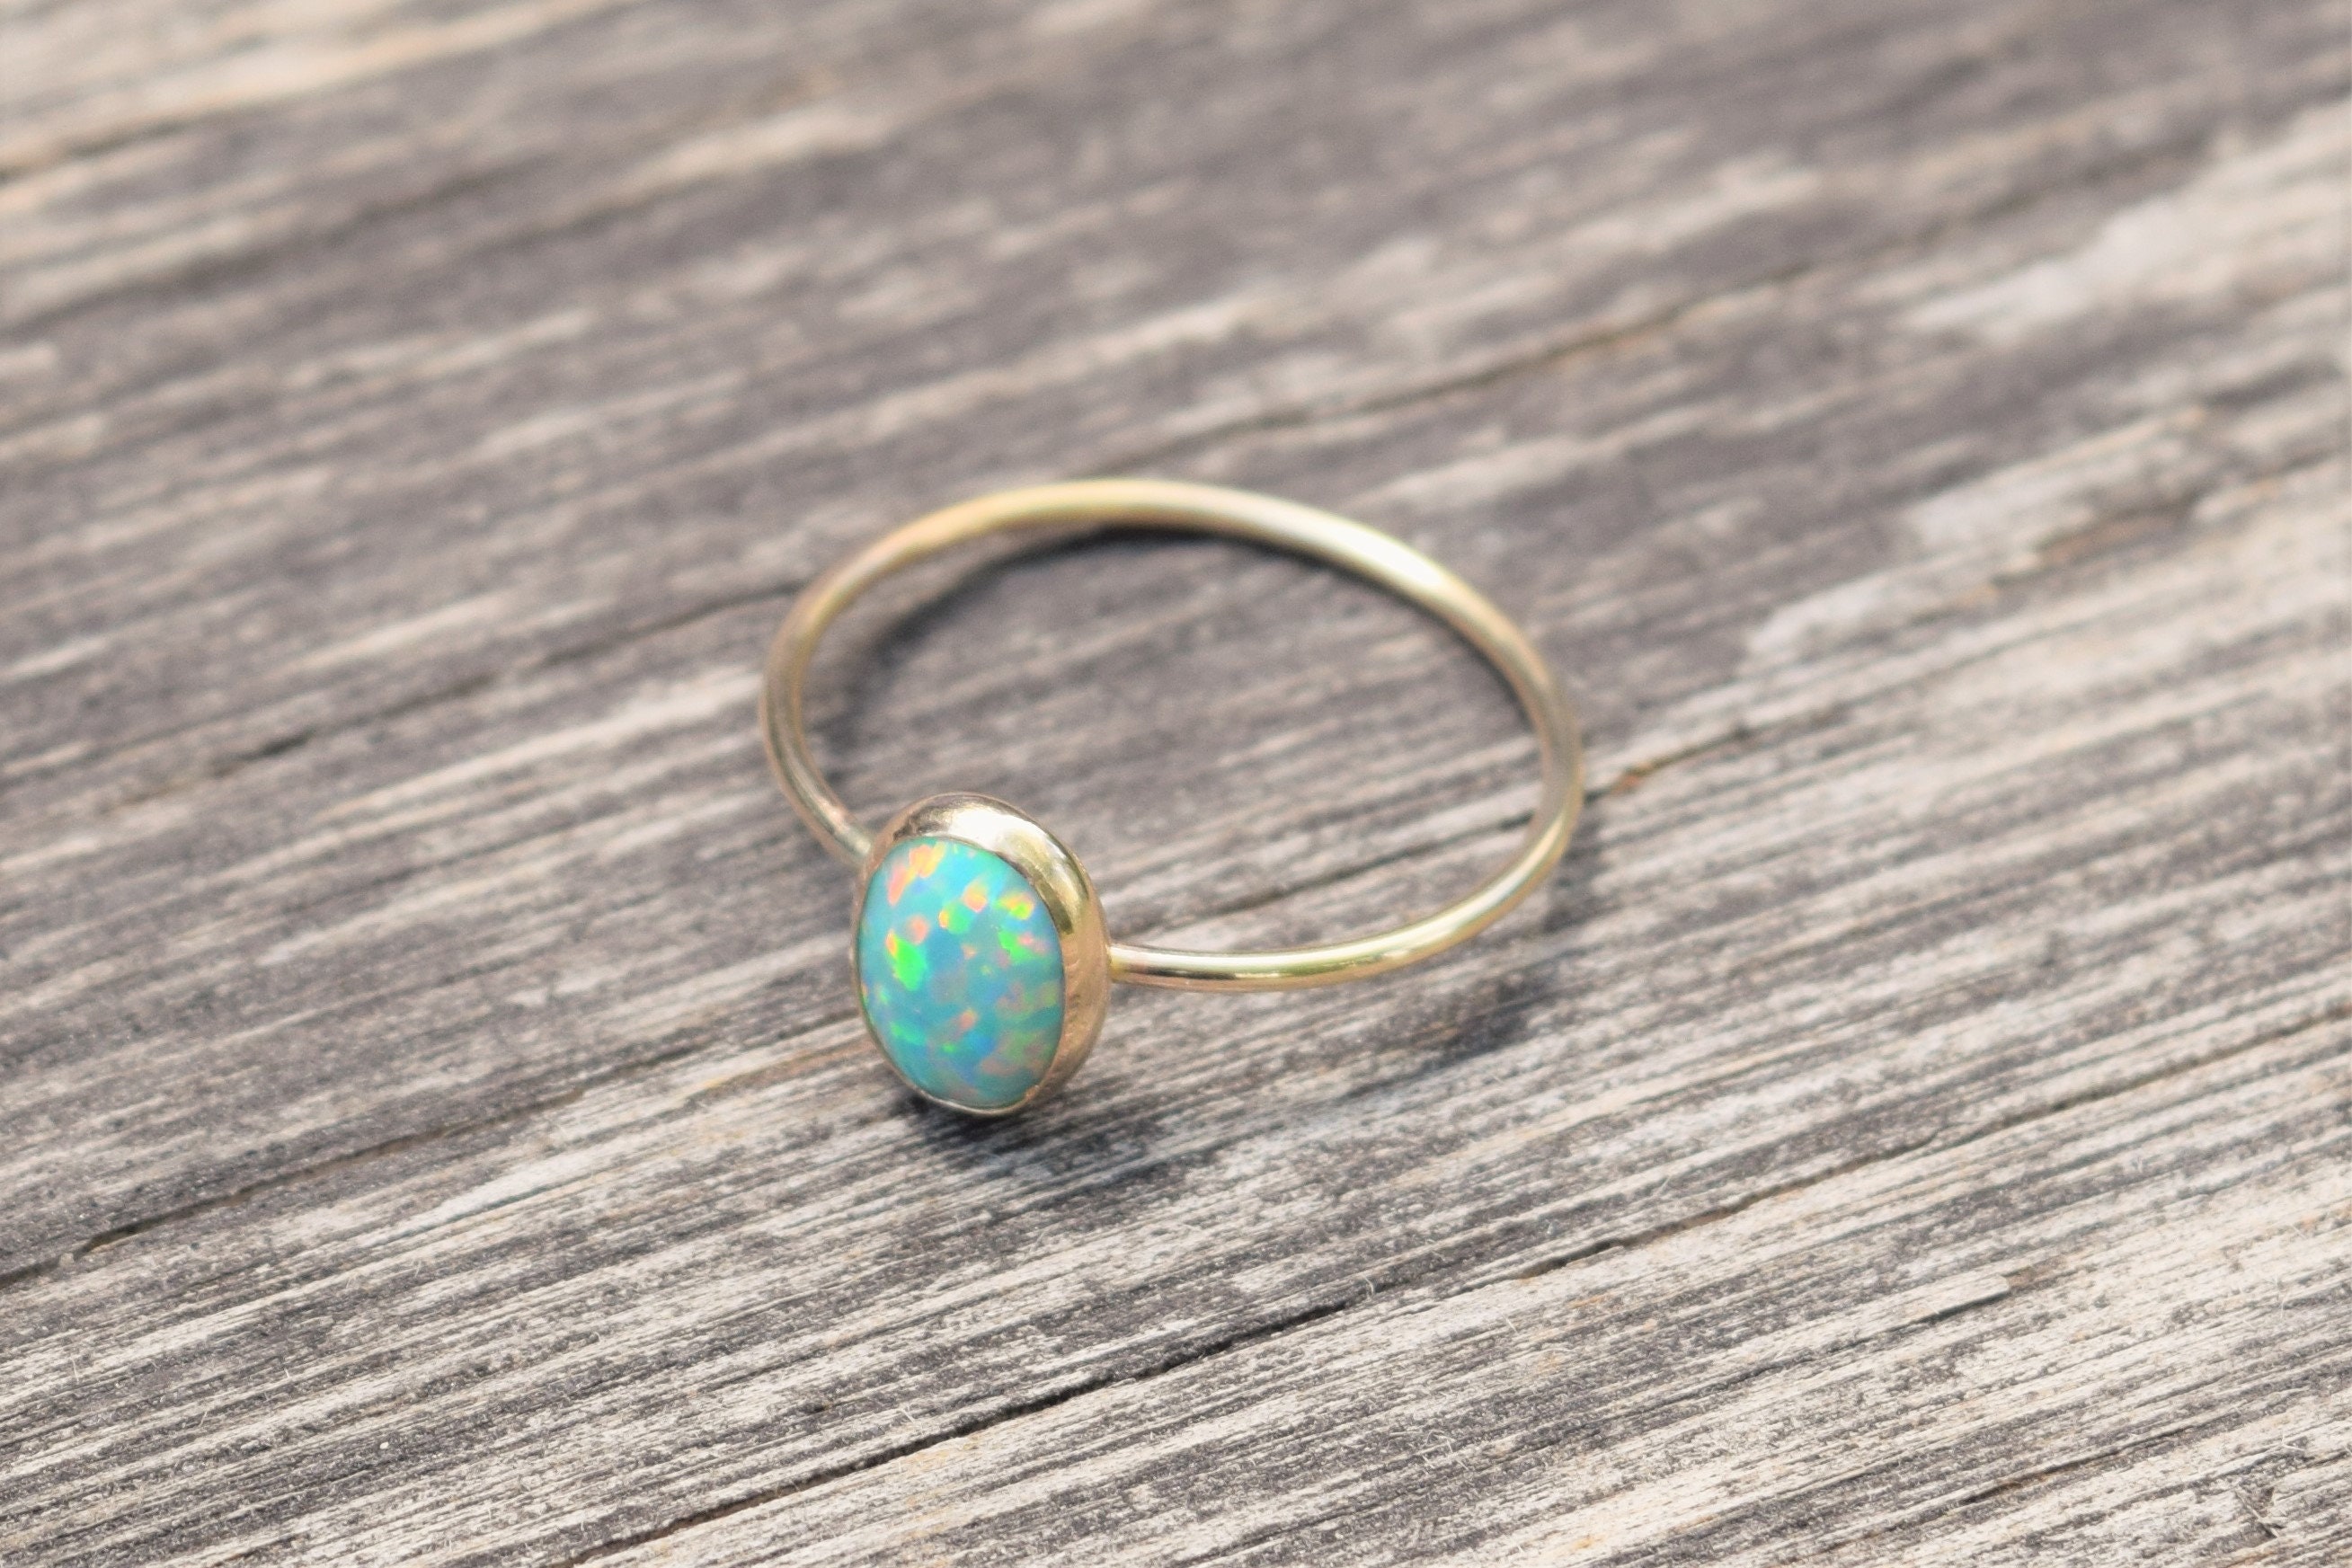 Teal Opal Ring Gold Opal Ring Mint Blue Opal Delicate Gold | Etsy